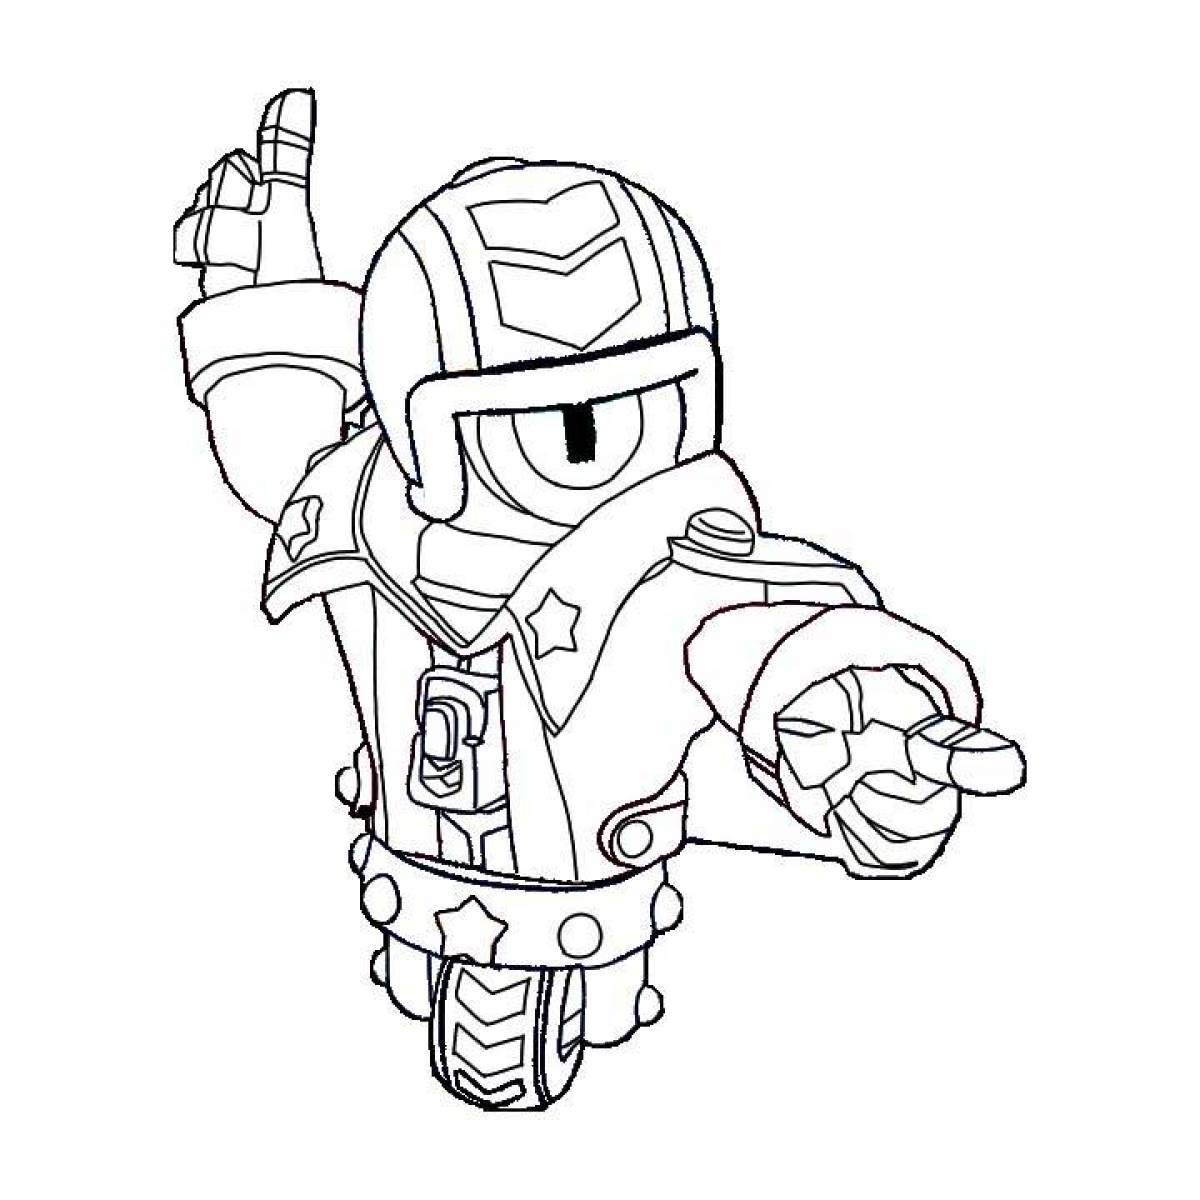 Playful bravo stars buster coloring page